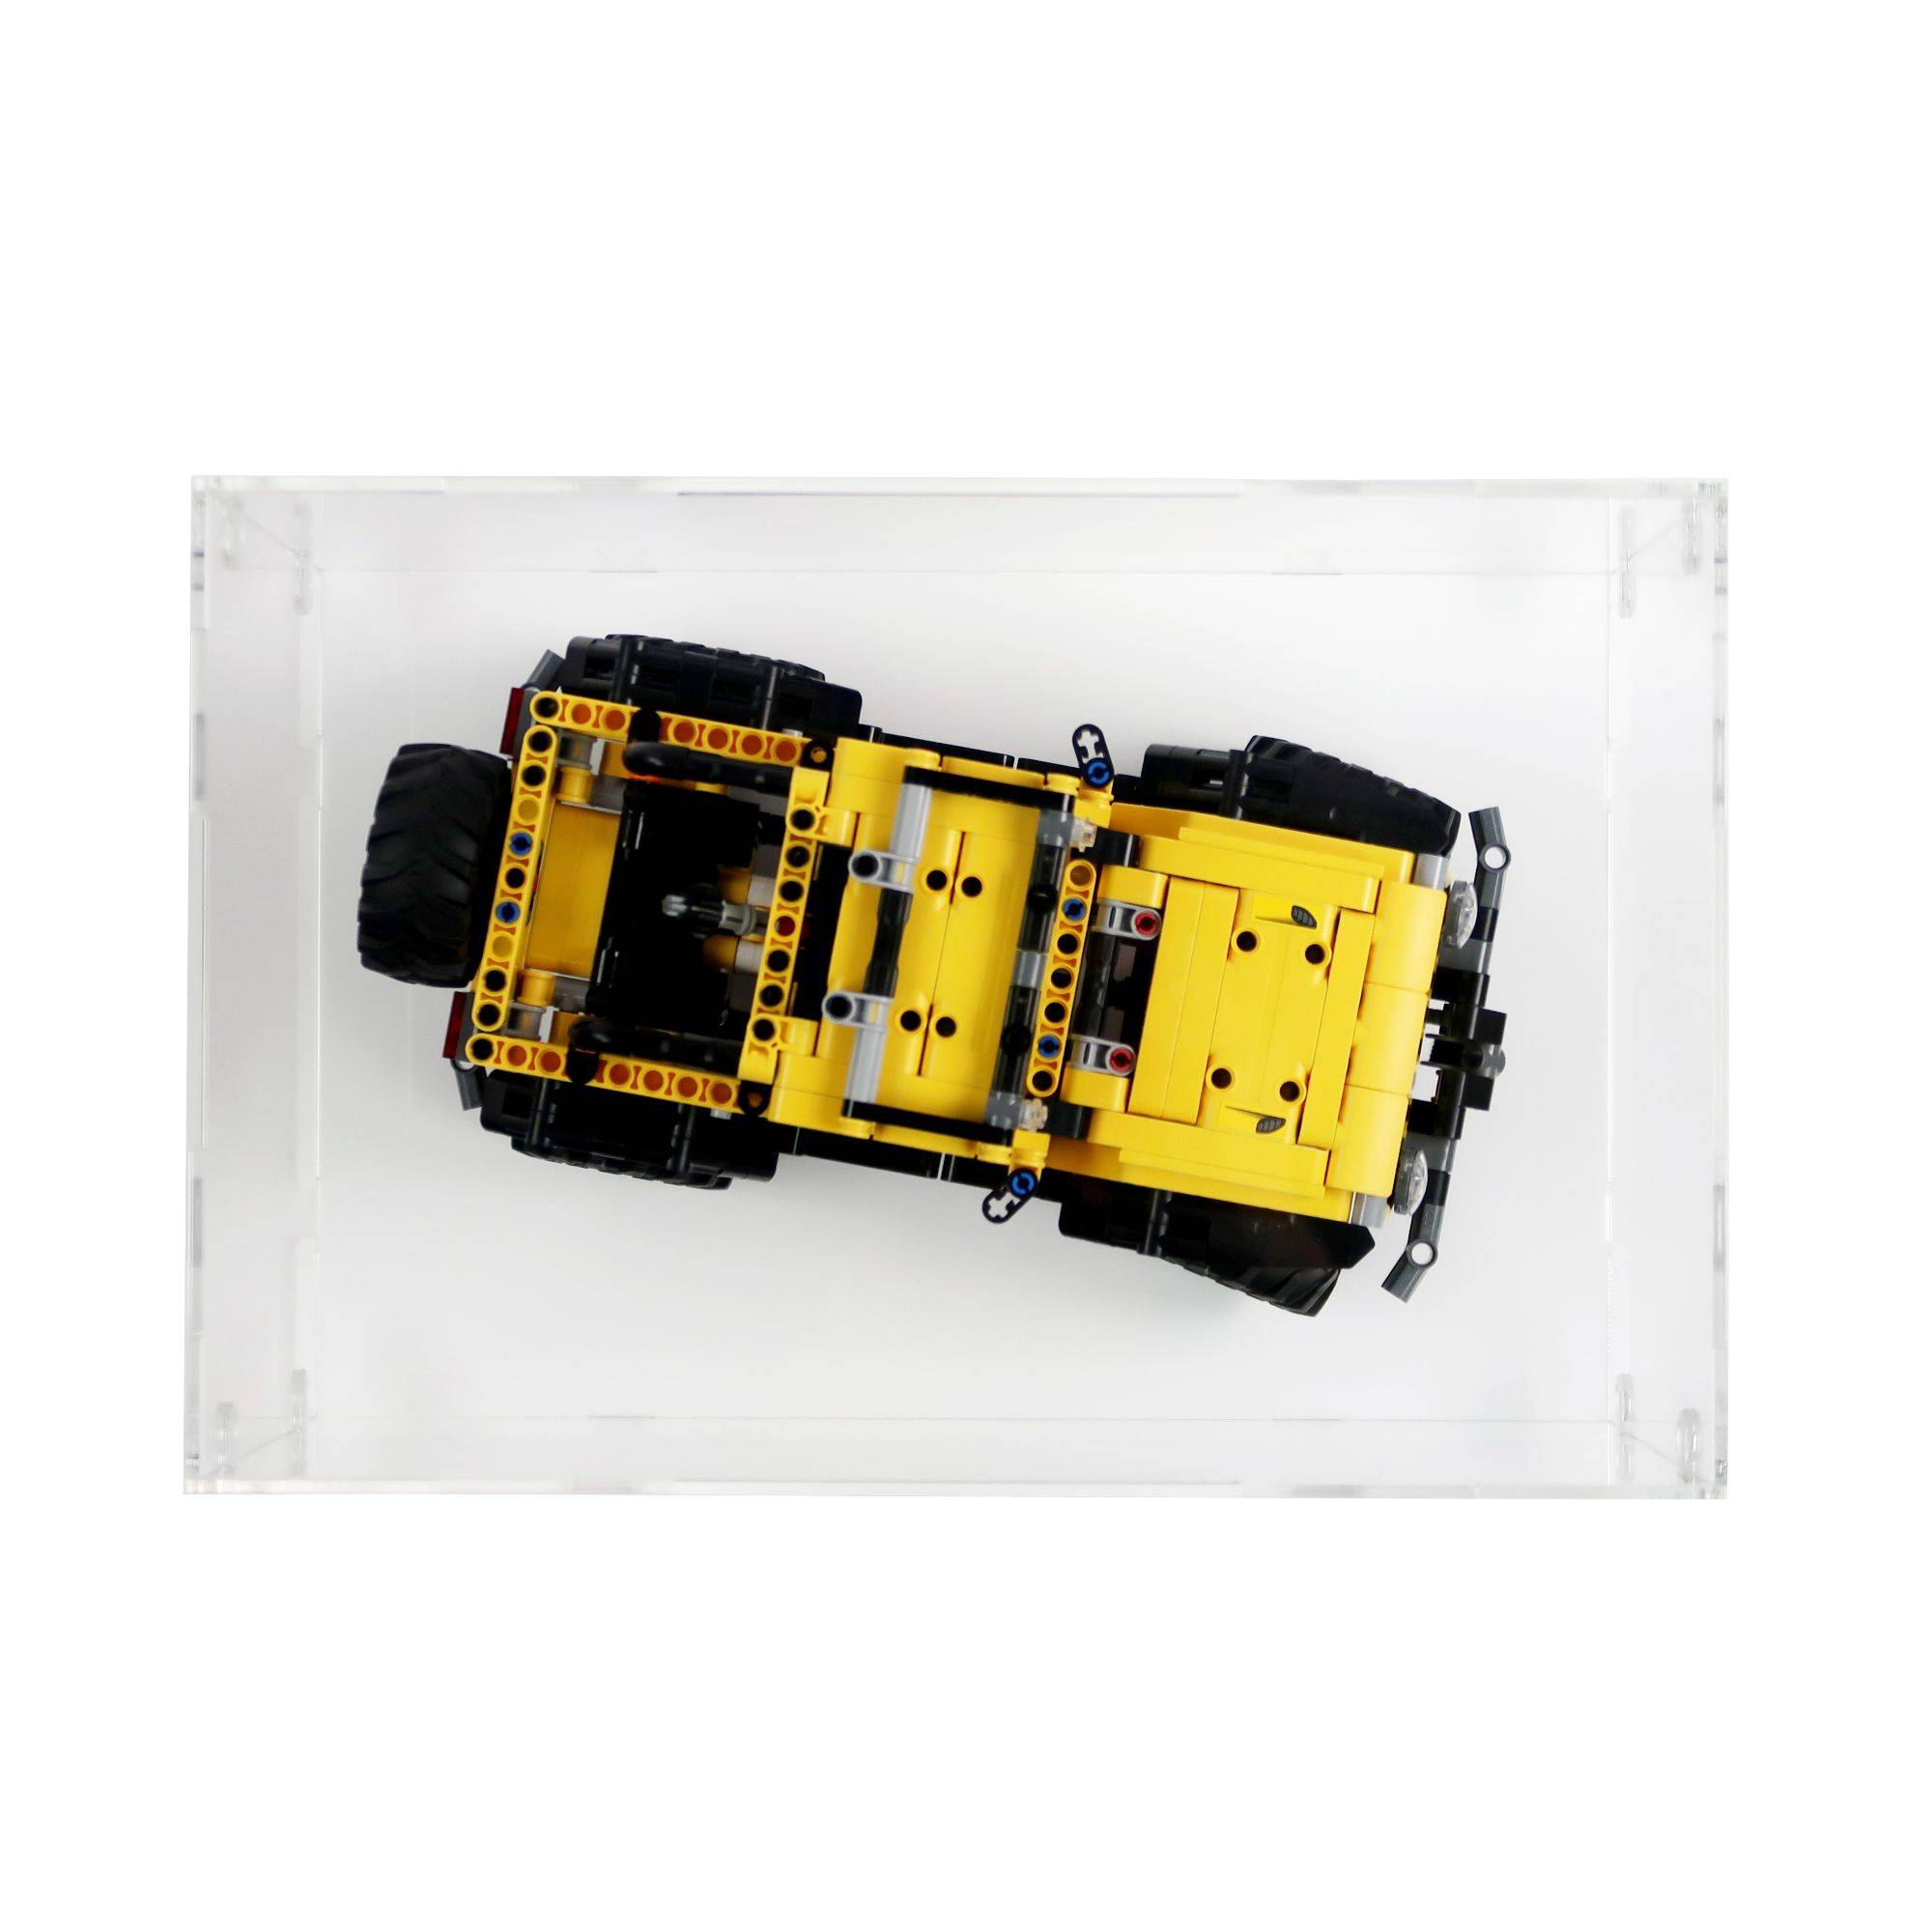 Acrylic Displays for your Lego Models-Lego 42122 Jeep Wrangler